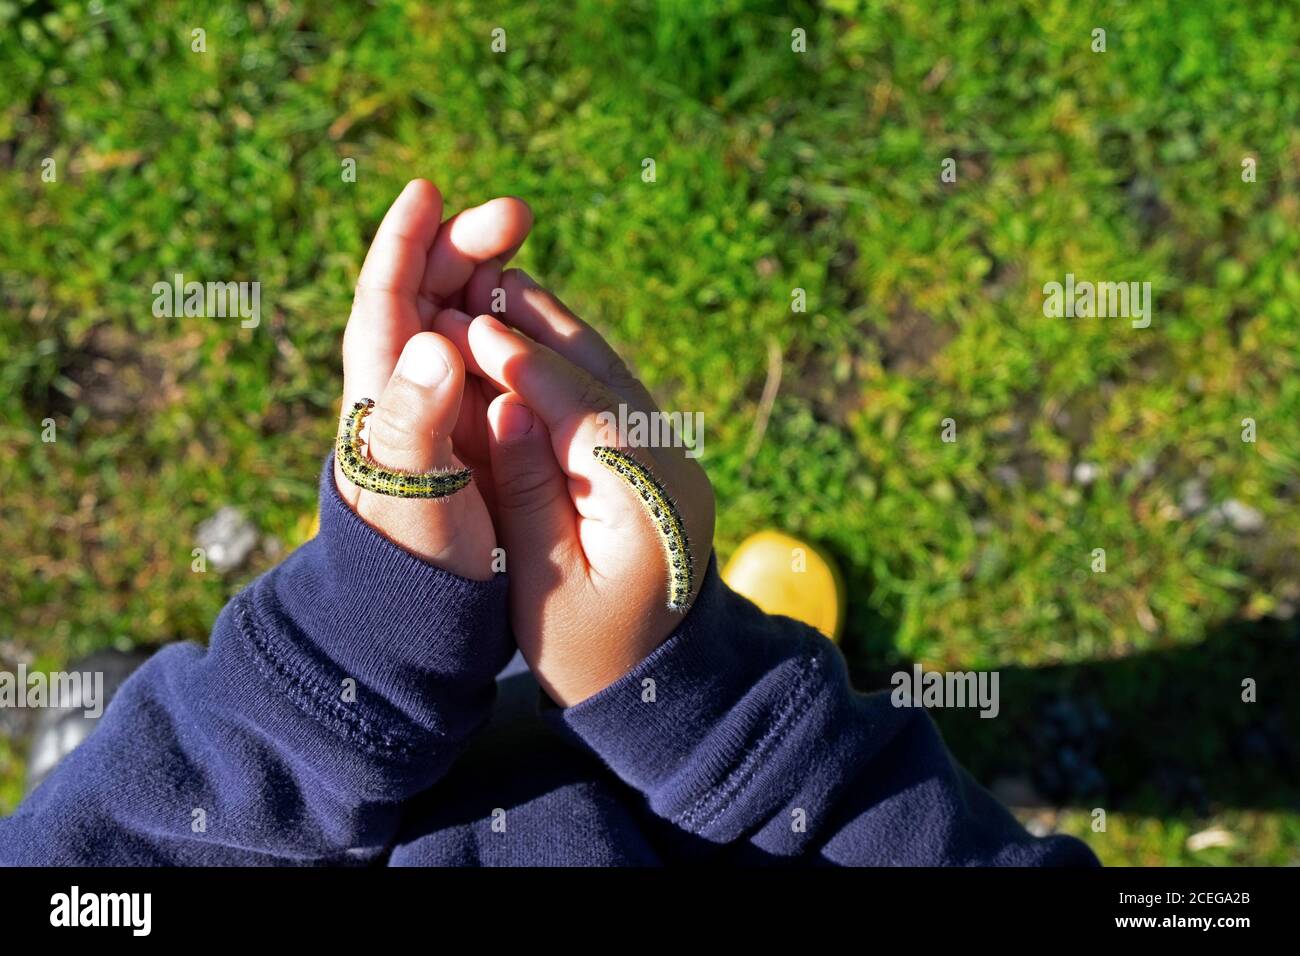 Child 3 with cabbage white caterpillars crawling on hands view from above in summer Carmarthenshire Wales UK  KATHY DEWITT Stock Photo